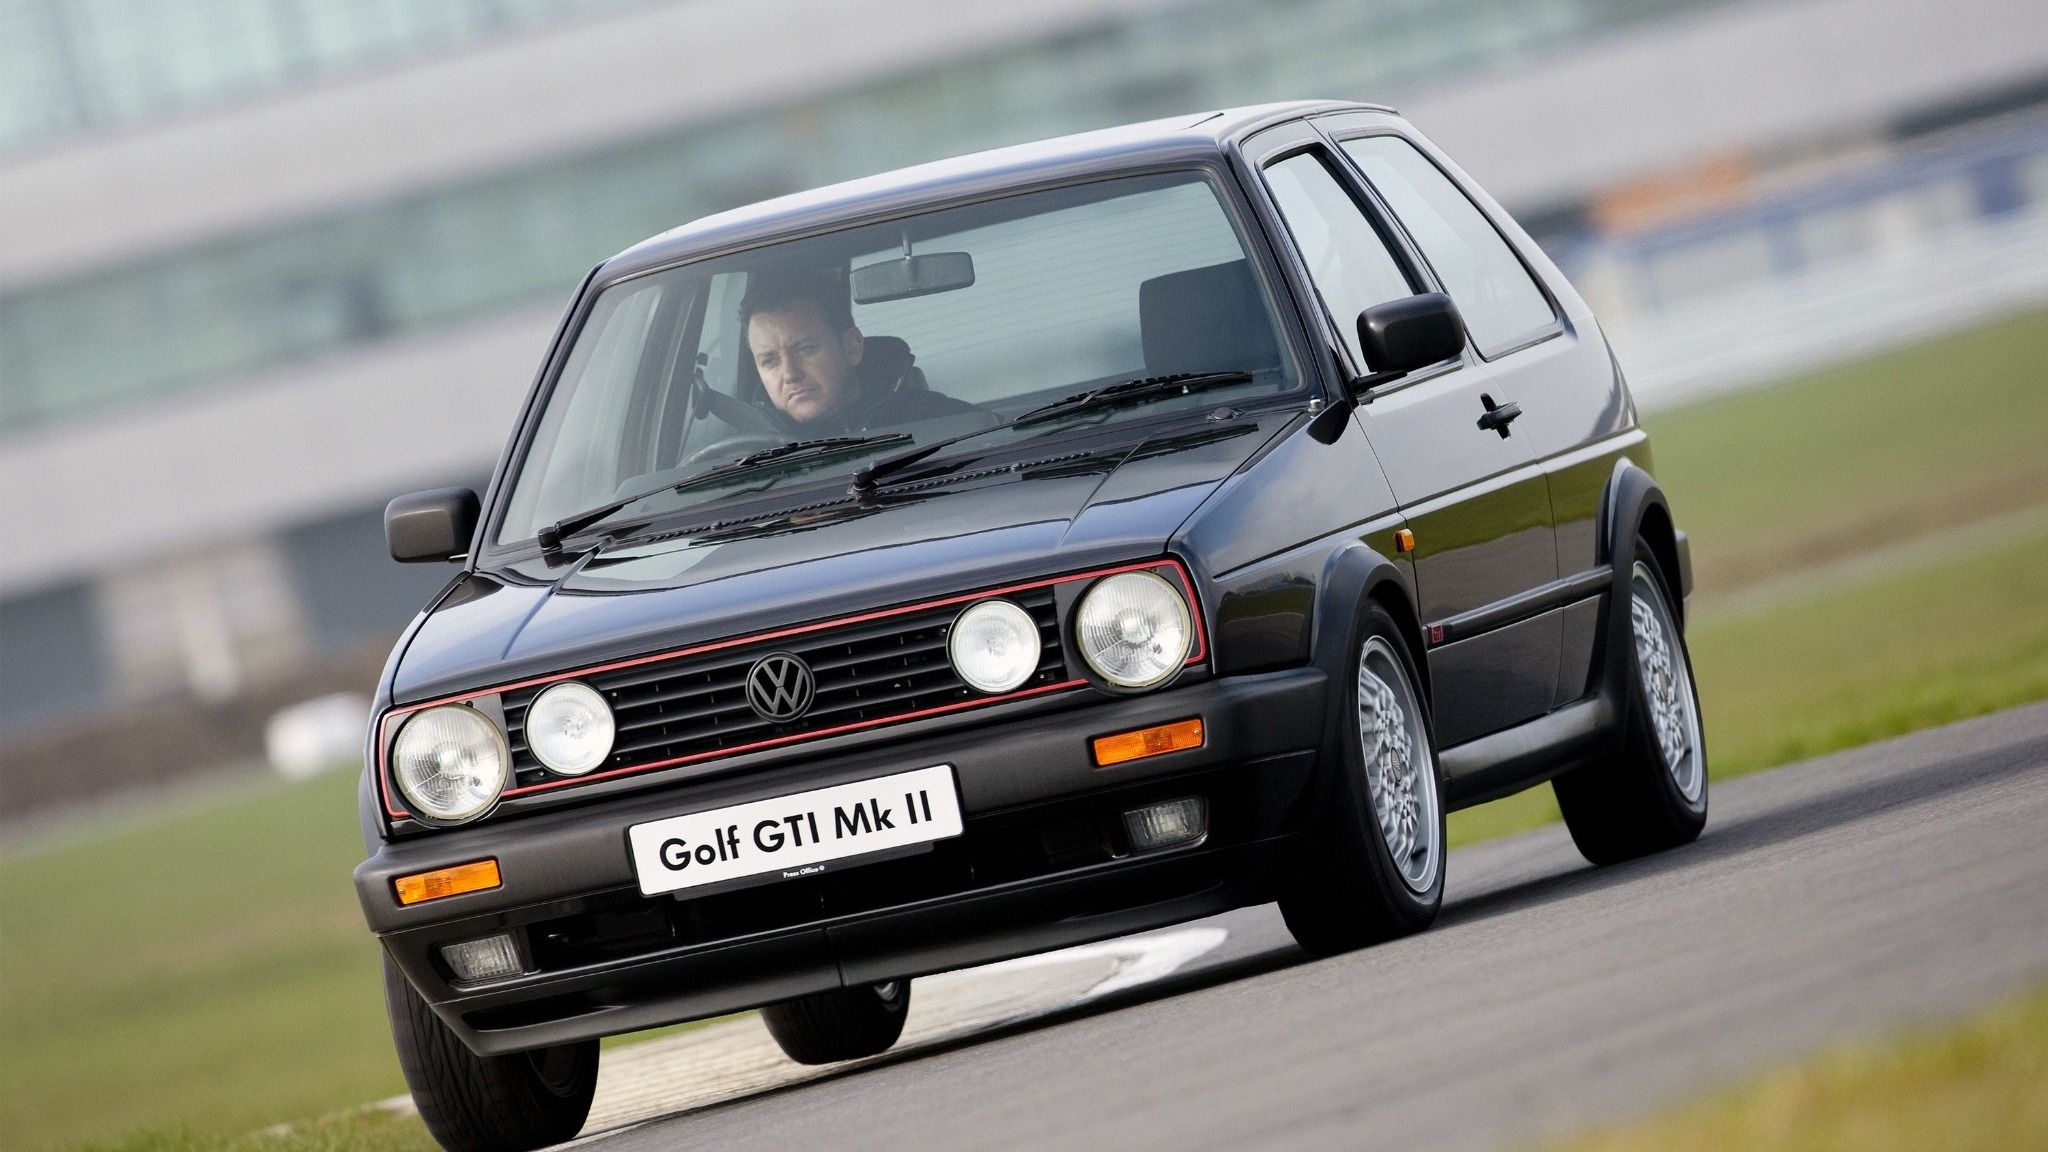 Front view of a black VW Golf GTI MkII